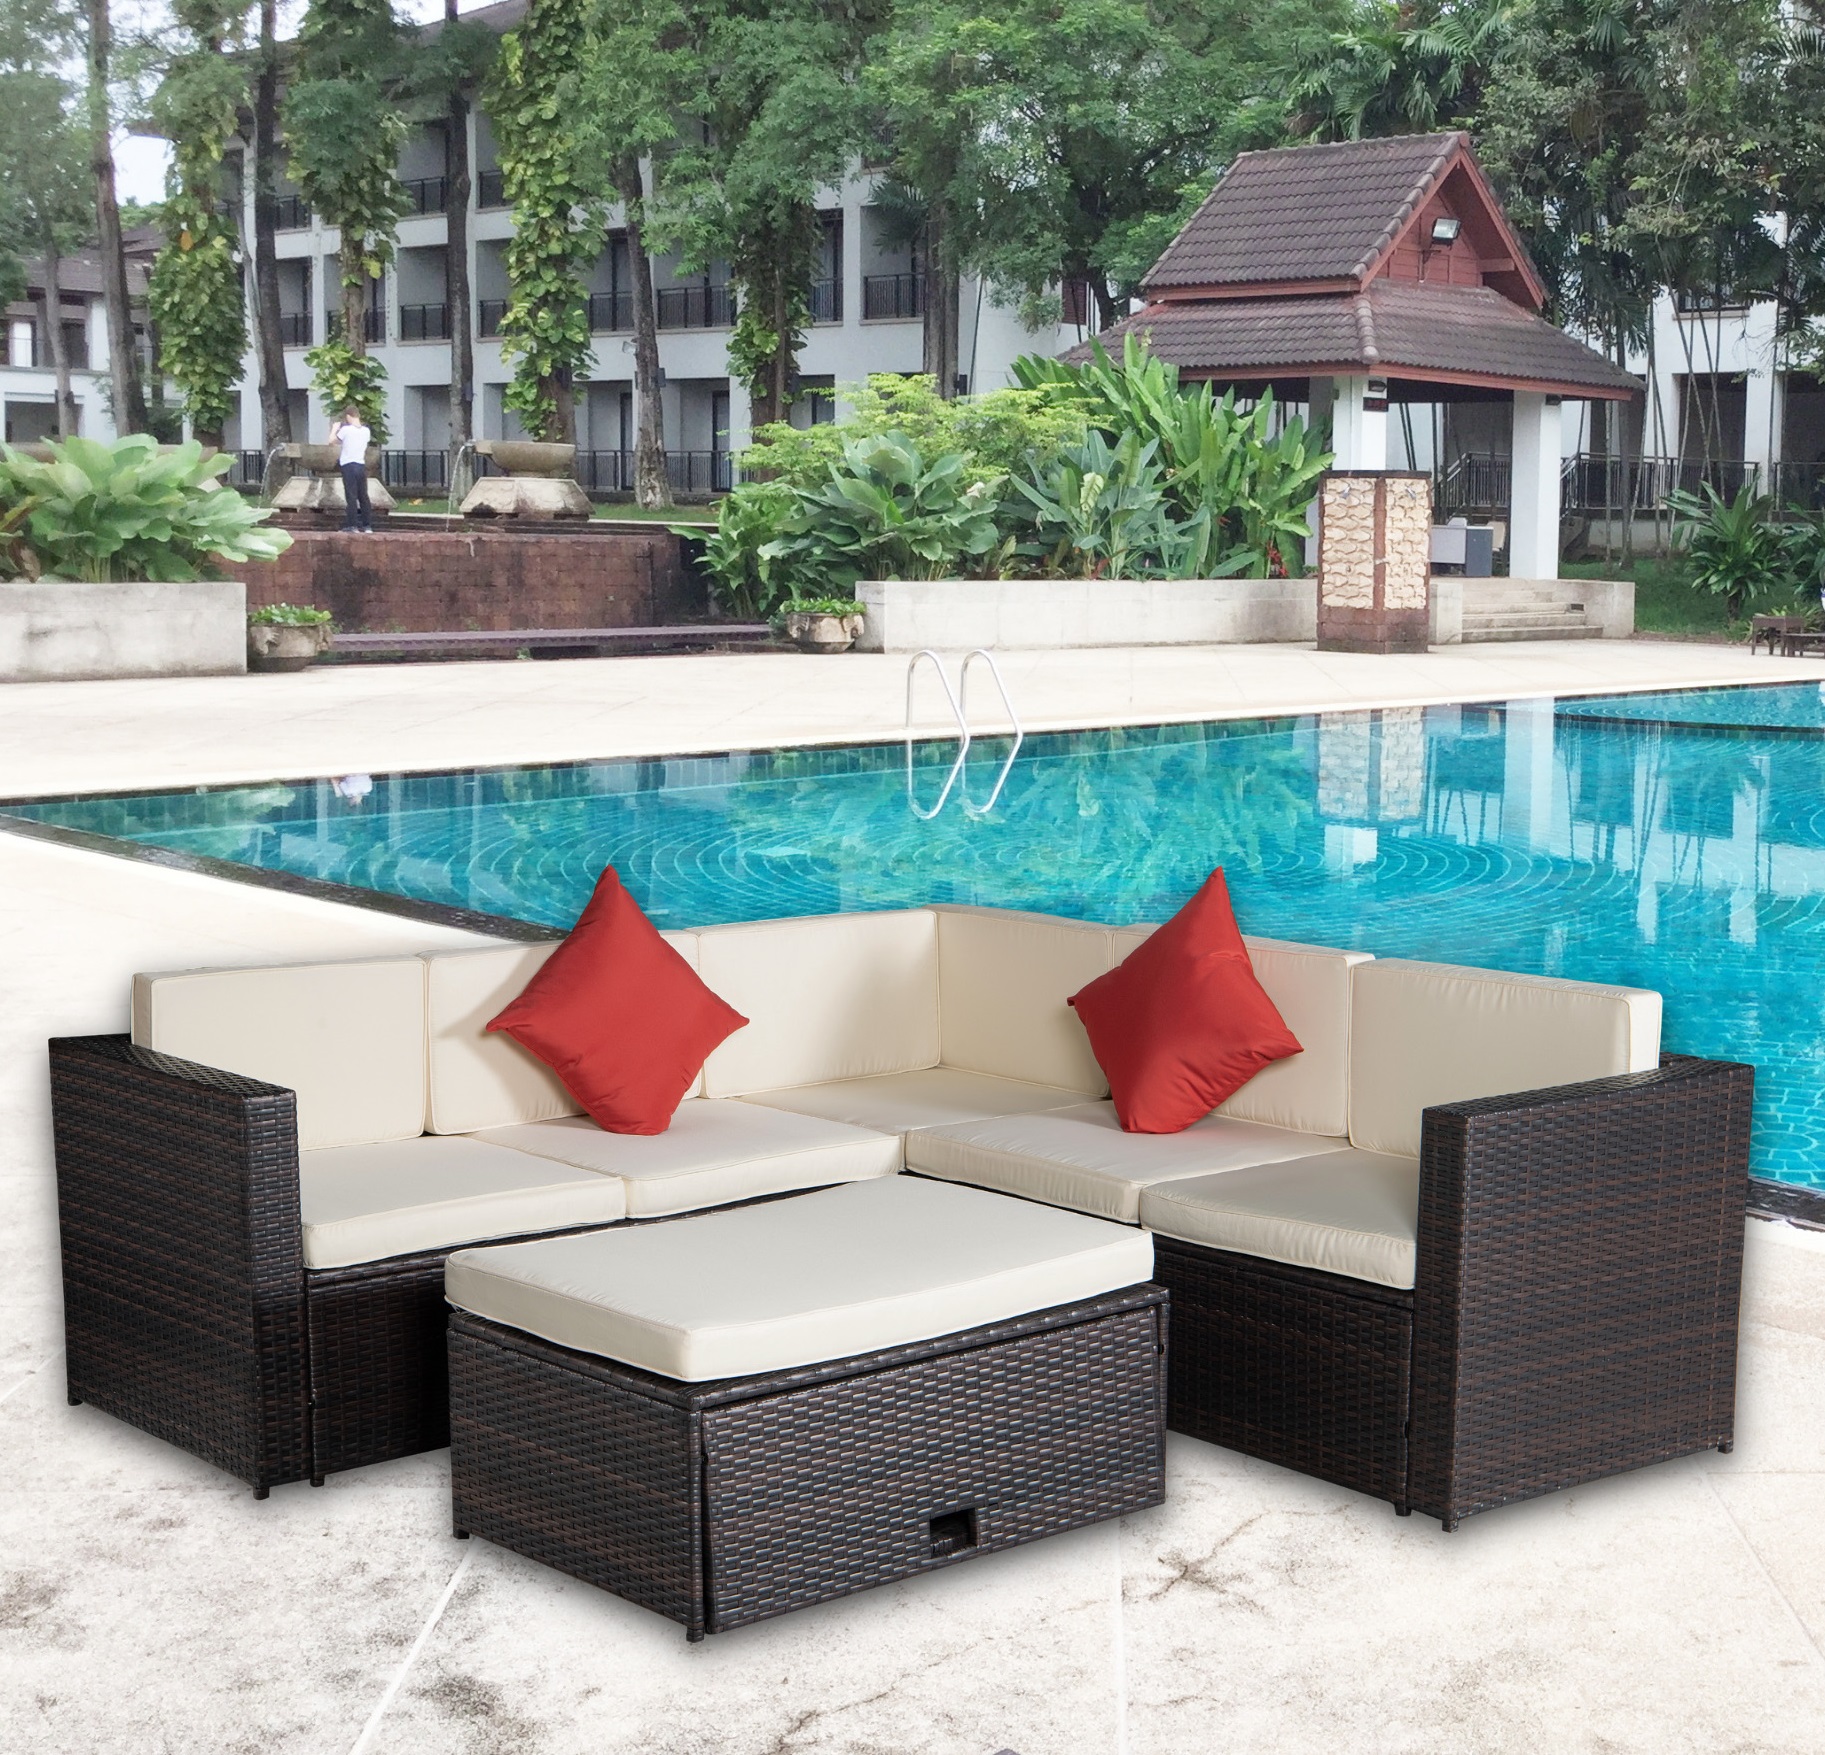 Outdoor Furniture Sets Sofa Sets, 4 PCS Conversation Sets Sectional Furniture Set with 2 Loveseat, Corner Chair, and Wicker Table for Garden Poolside Deck, LJ3268 - image 1 of 11